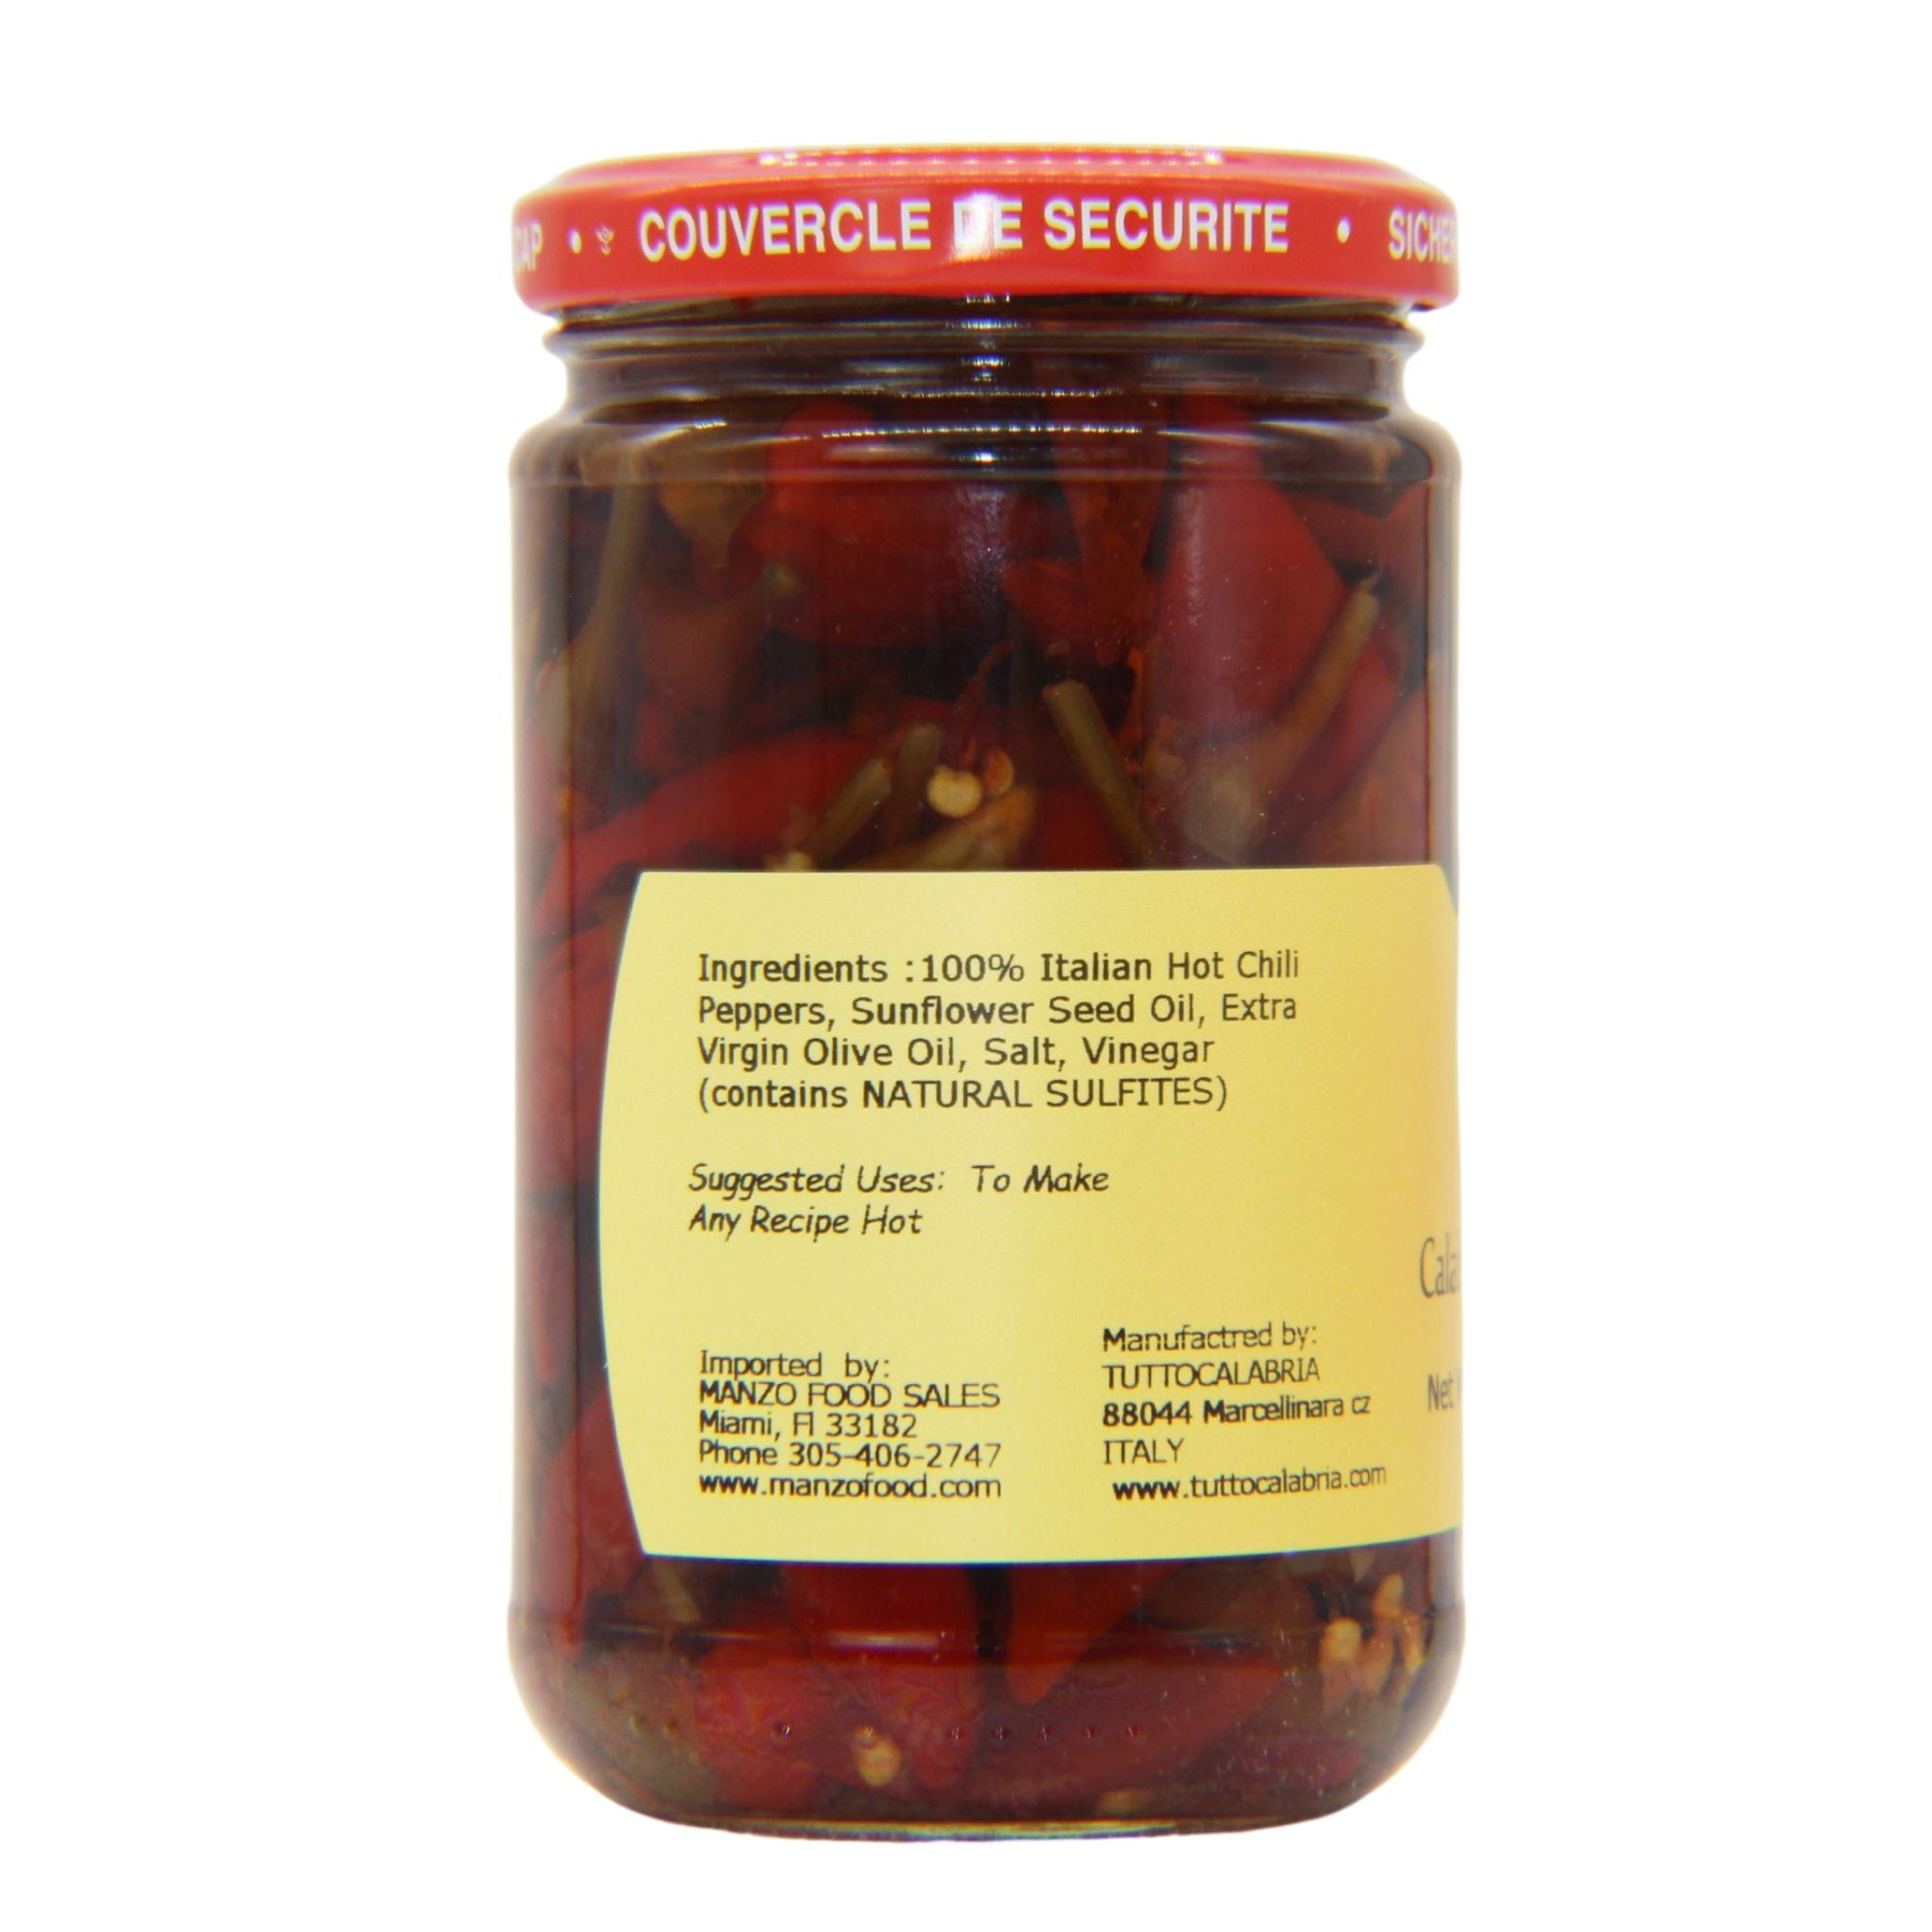 Tutto Calabria Whole Calabrian Chili Peppers 10oz Jar Ingredients